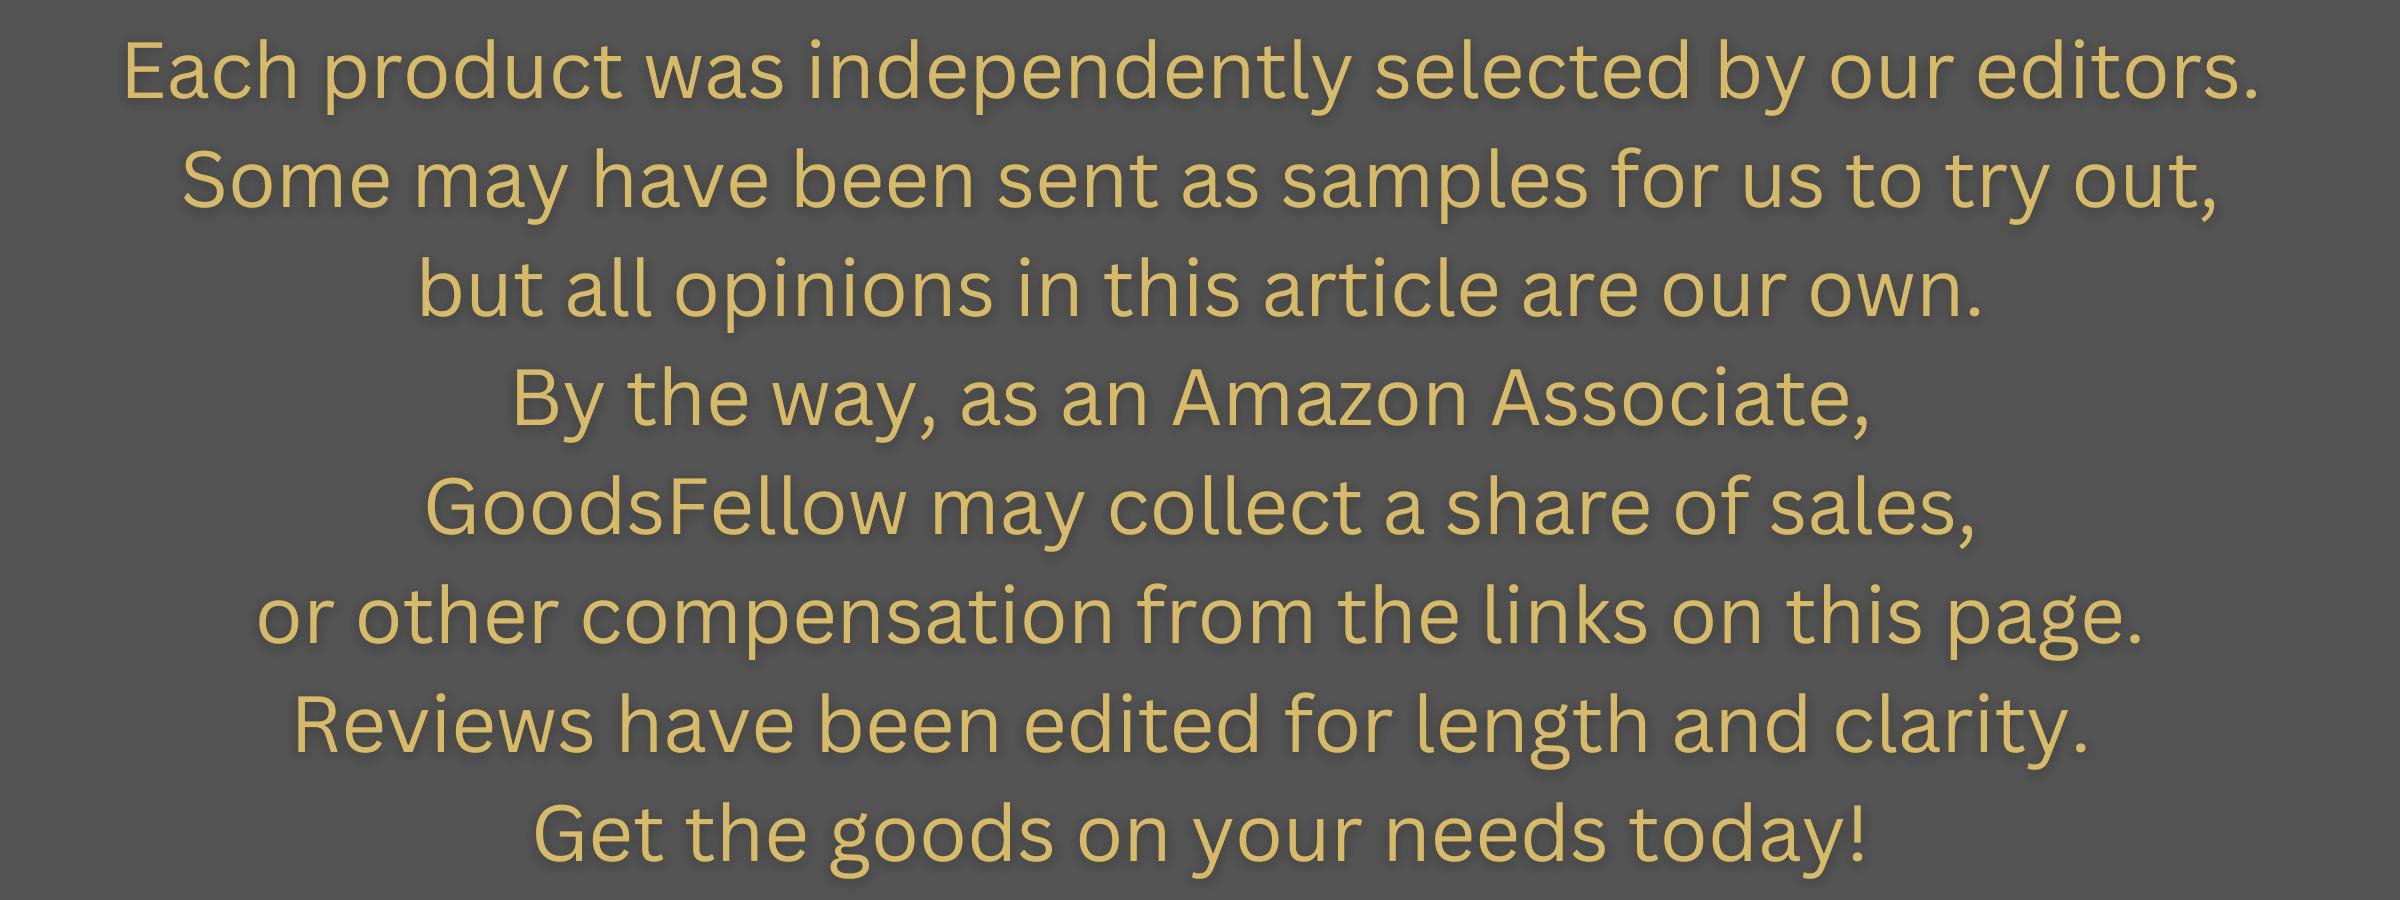 Amazon Associates Disclosure - We may get paid a portion of sale from the links on this page.